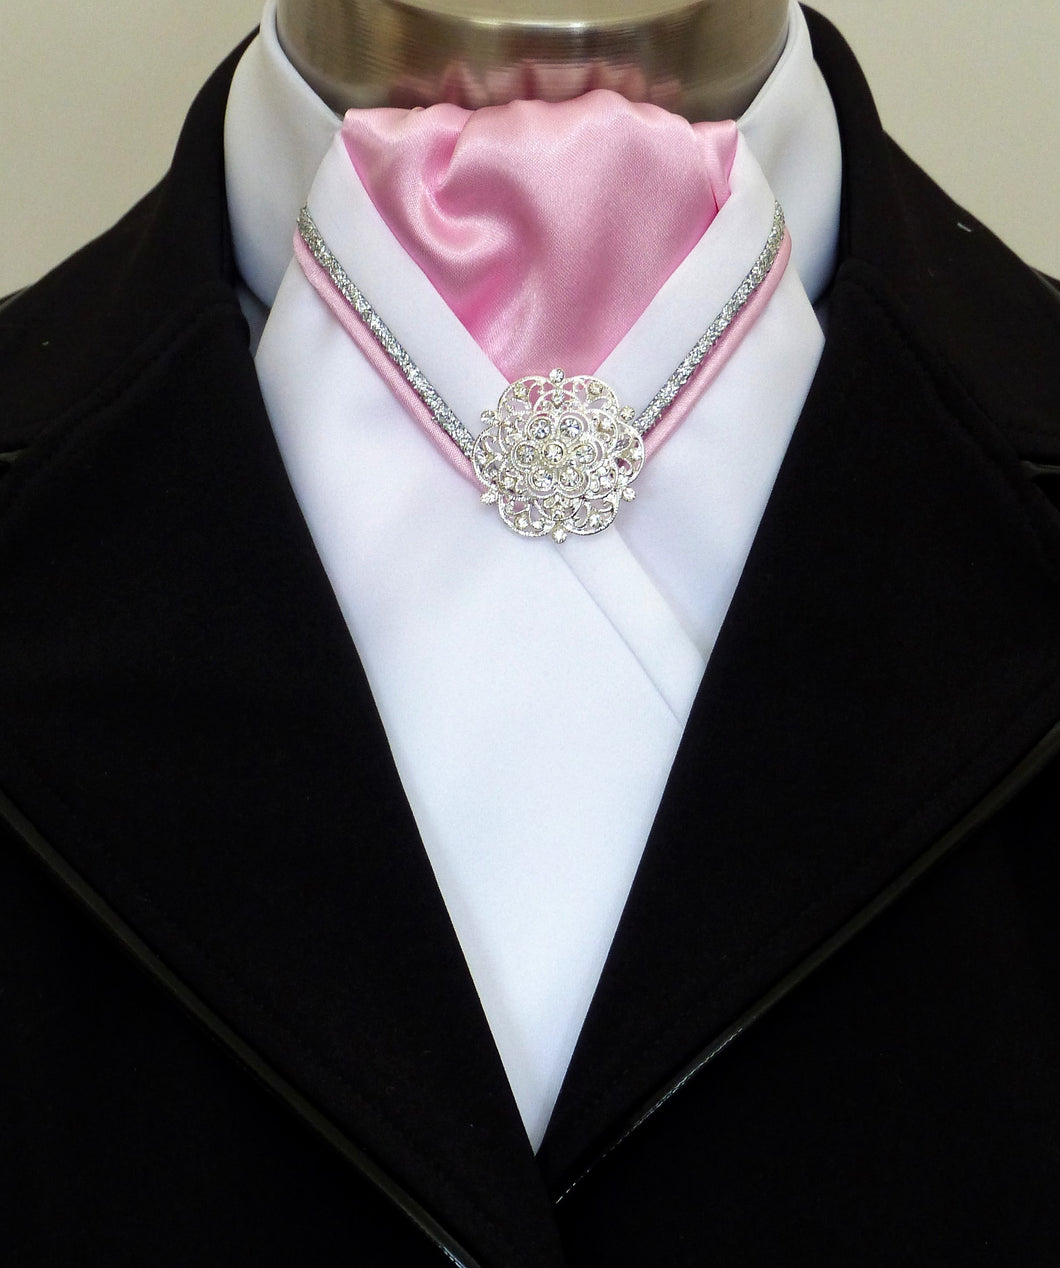 ERA RACHAEL STOCK TIE - White satin, pale pink, silver & pink V piping & brooch